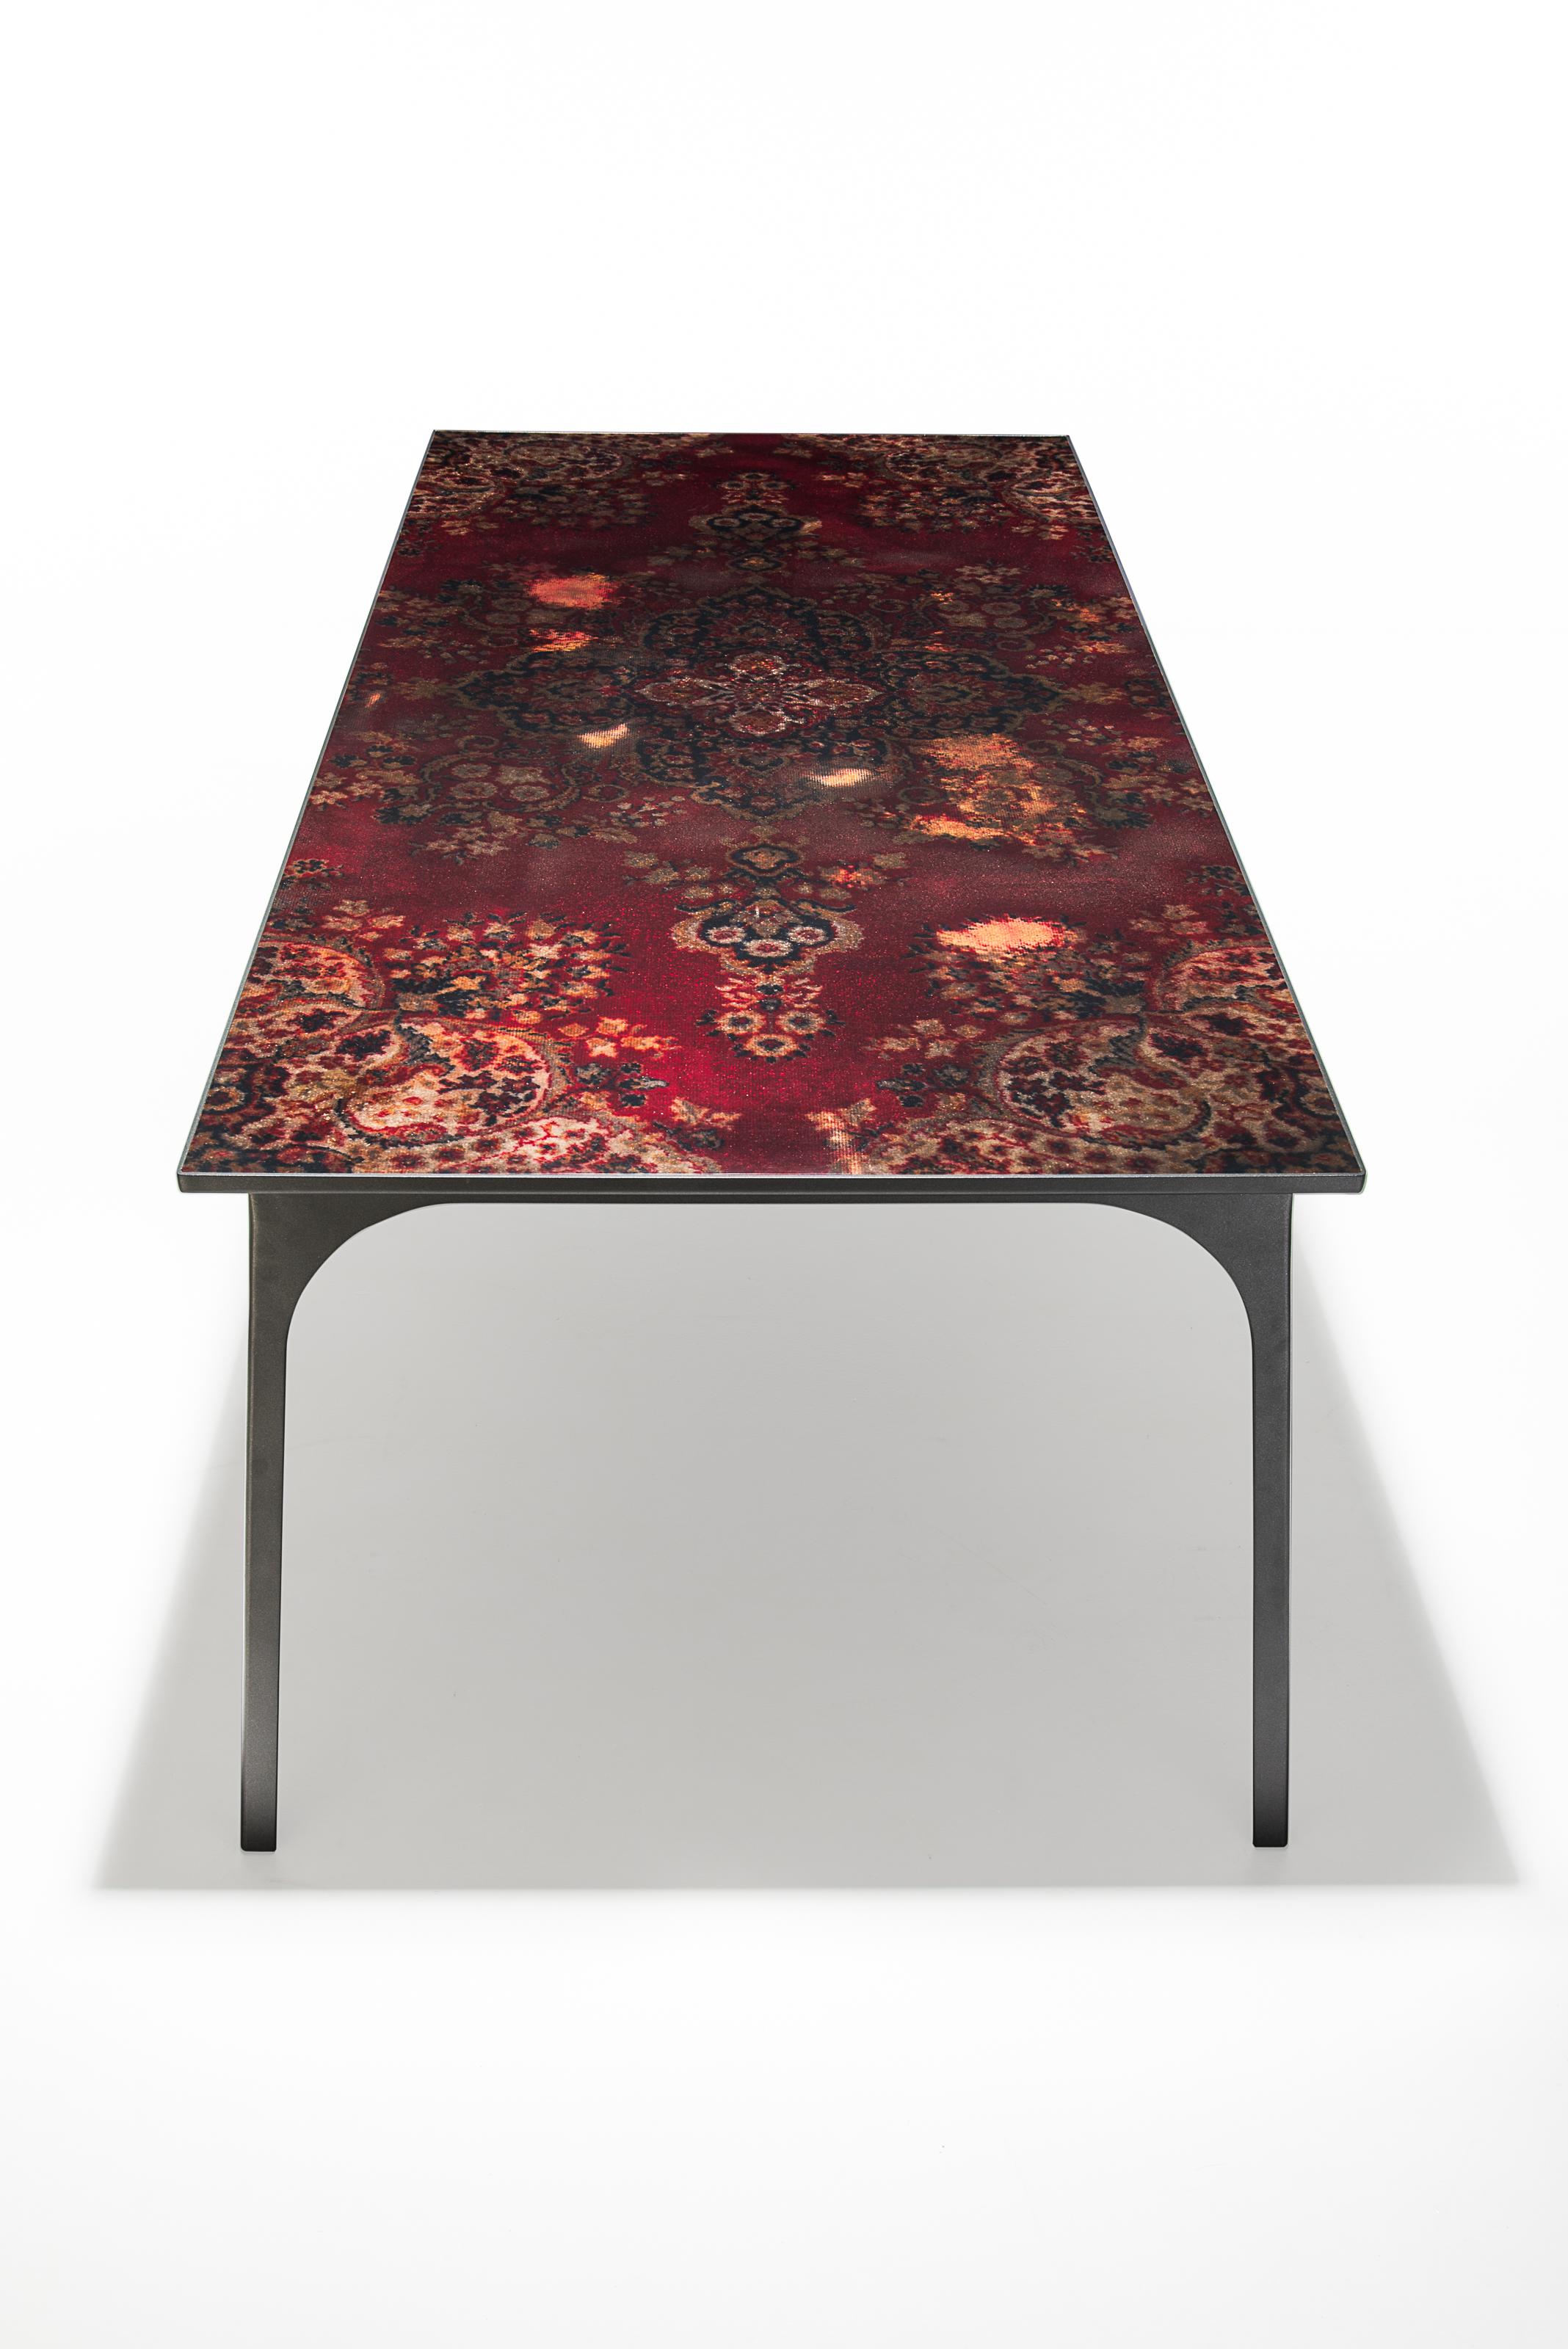 Café 6116 is an award-winning design by Atelier Ruben van Megen; a Dutch designer who designs conversation pieces. The table is inspired by and made of Persian carpets.

The table refers to the Golden Age, when Persian carpets made their